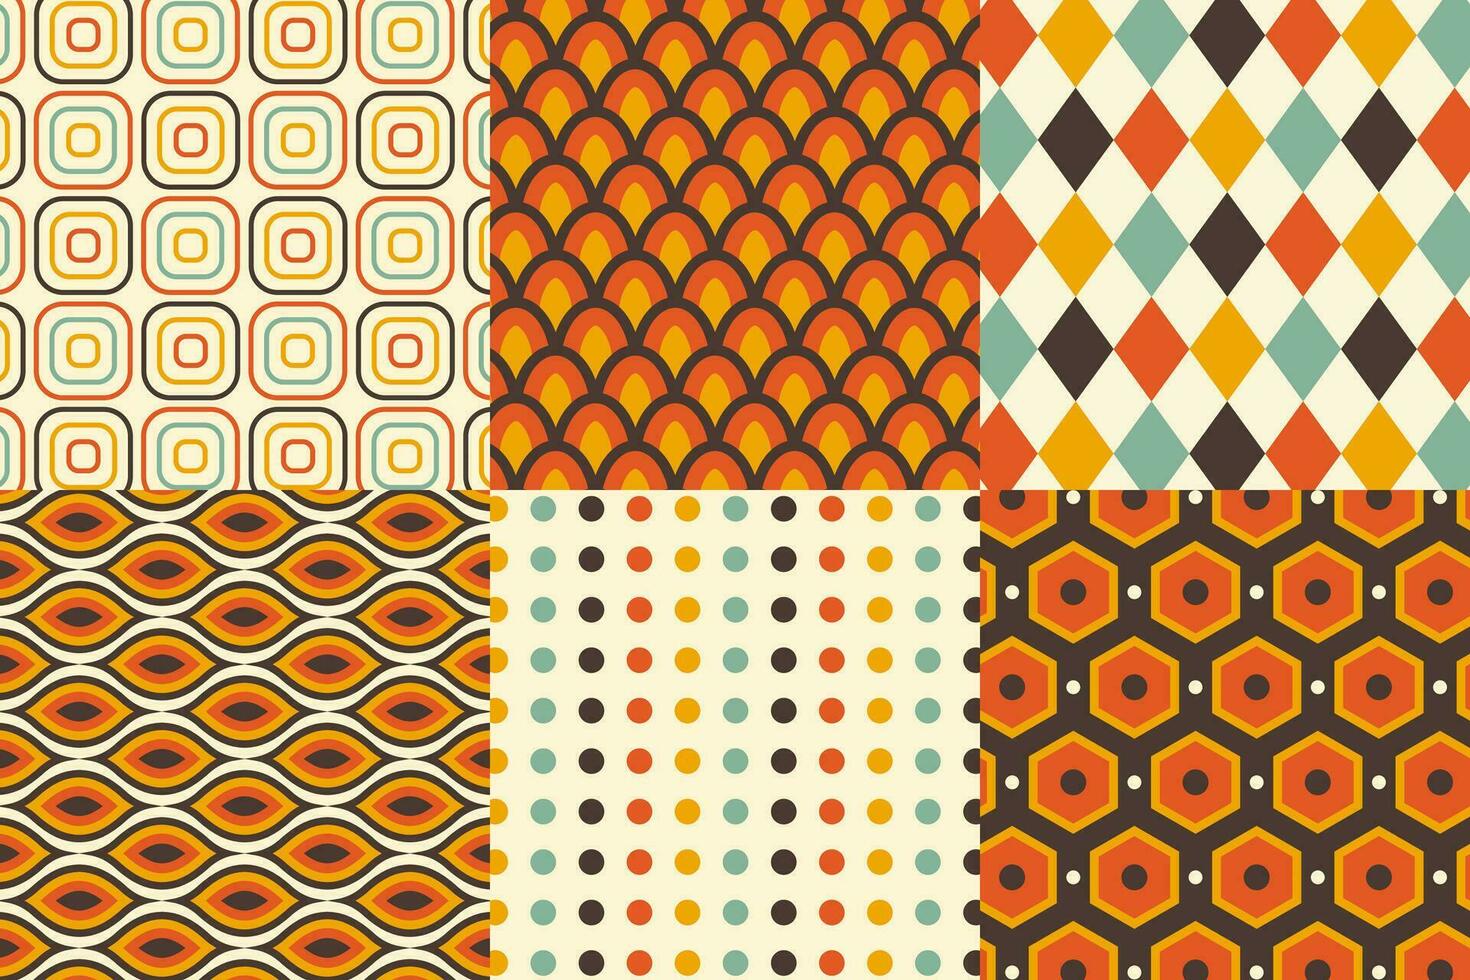 Set of pattern in retro style. Abstract texture decorative 50's, 60's, 70's style. Can be used for fabric, wallpaper, textile, wall decoration. Vector illustration